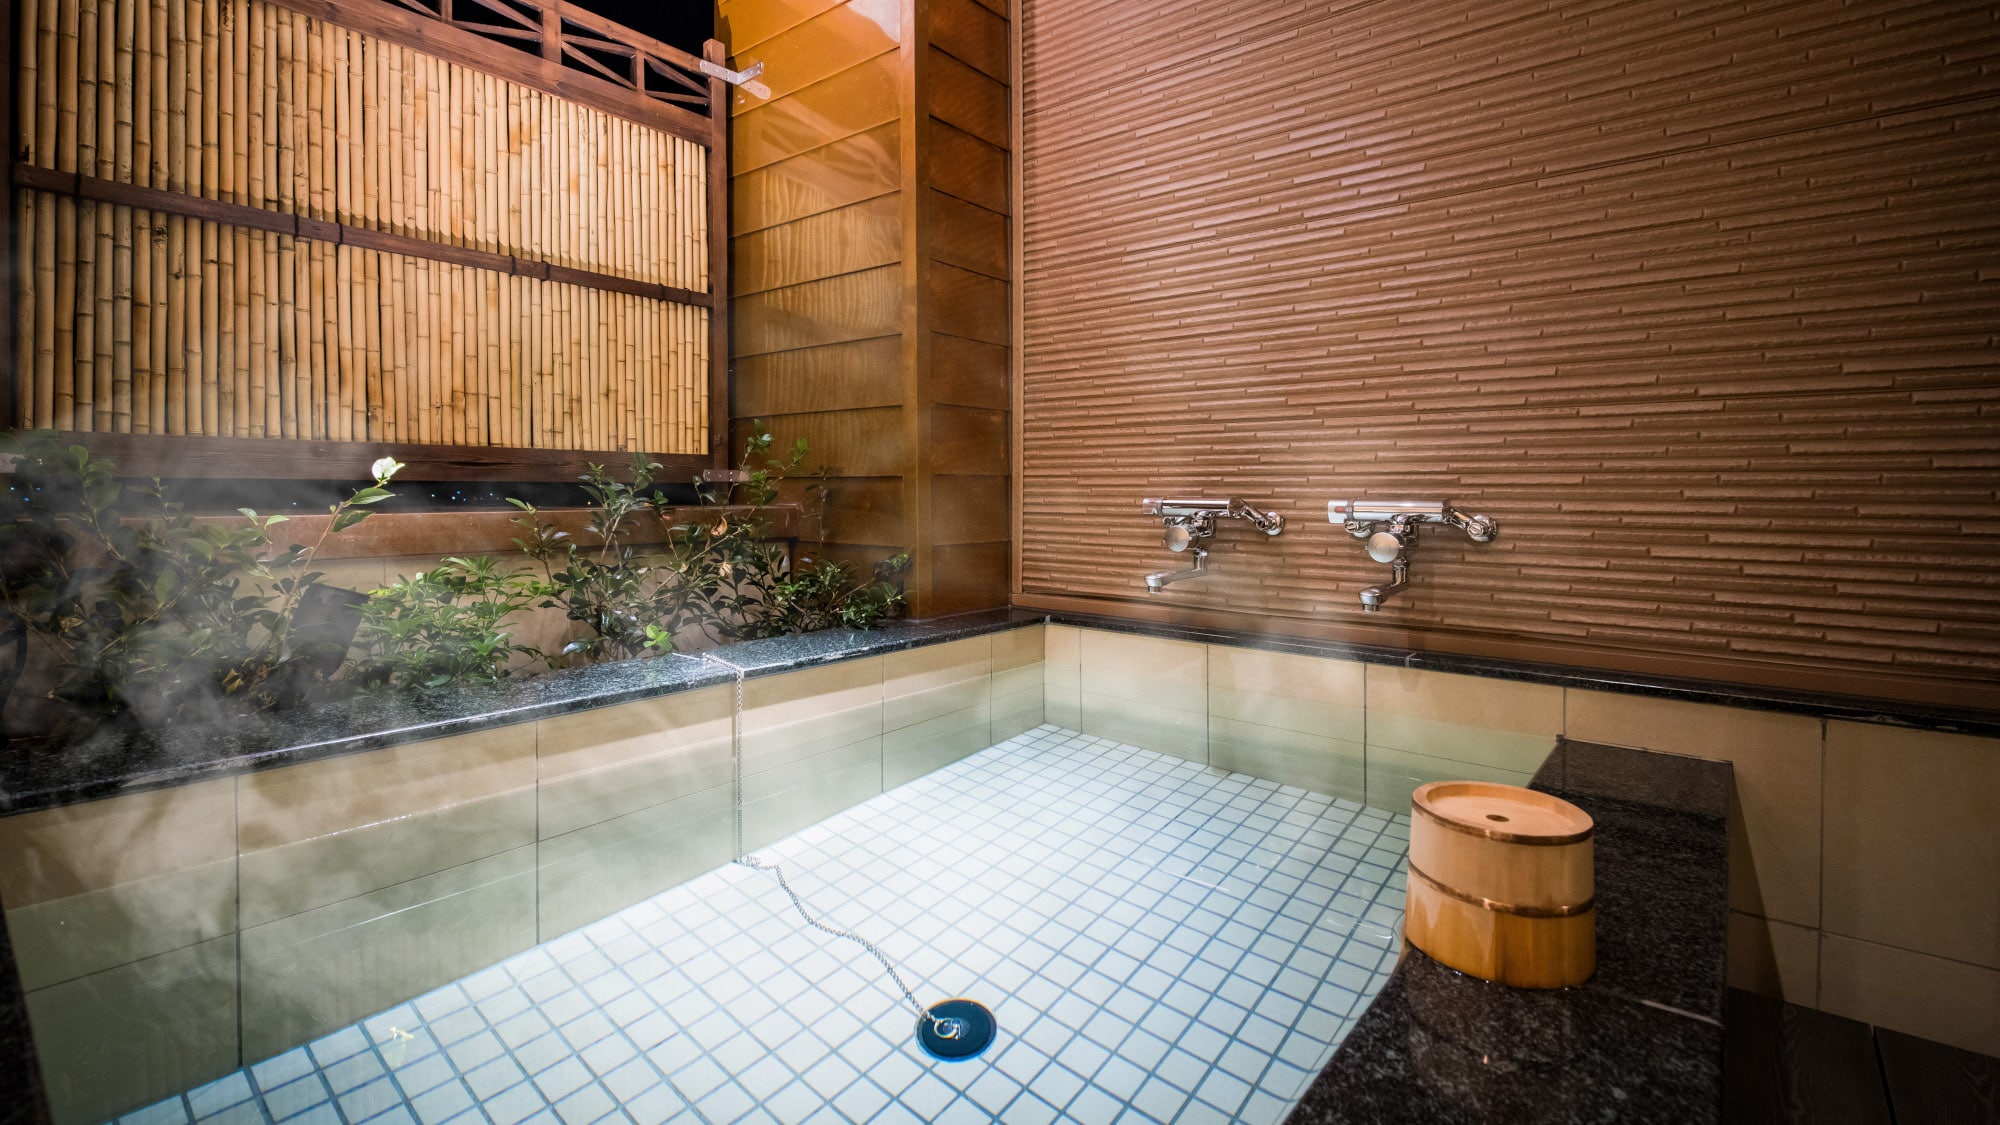 ◆ Guest room open-air bath ◆ 55.8 square meters ◆